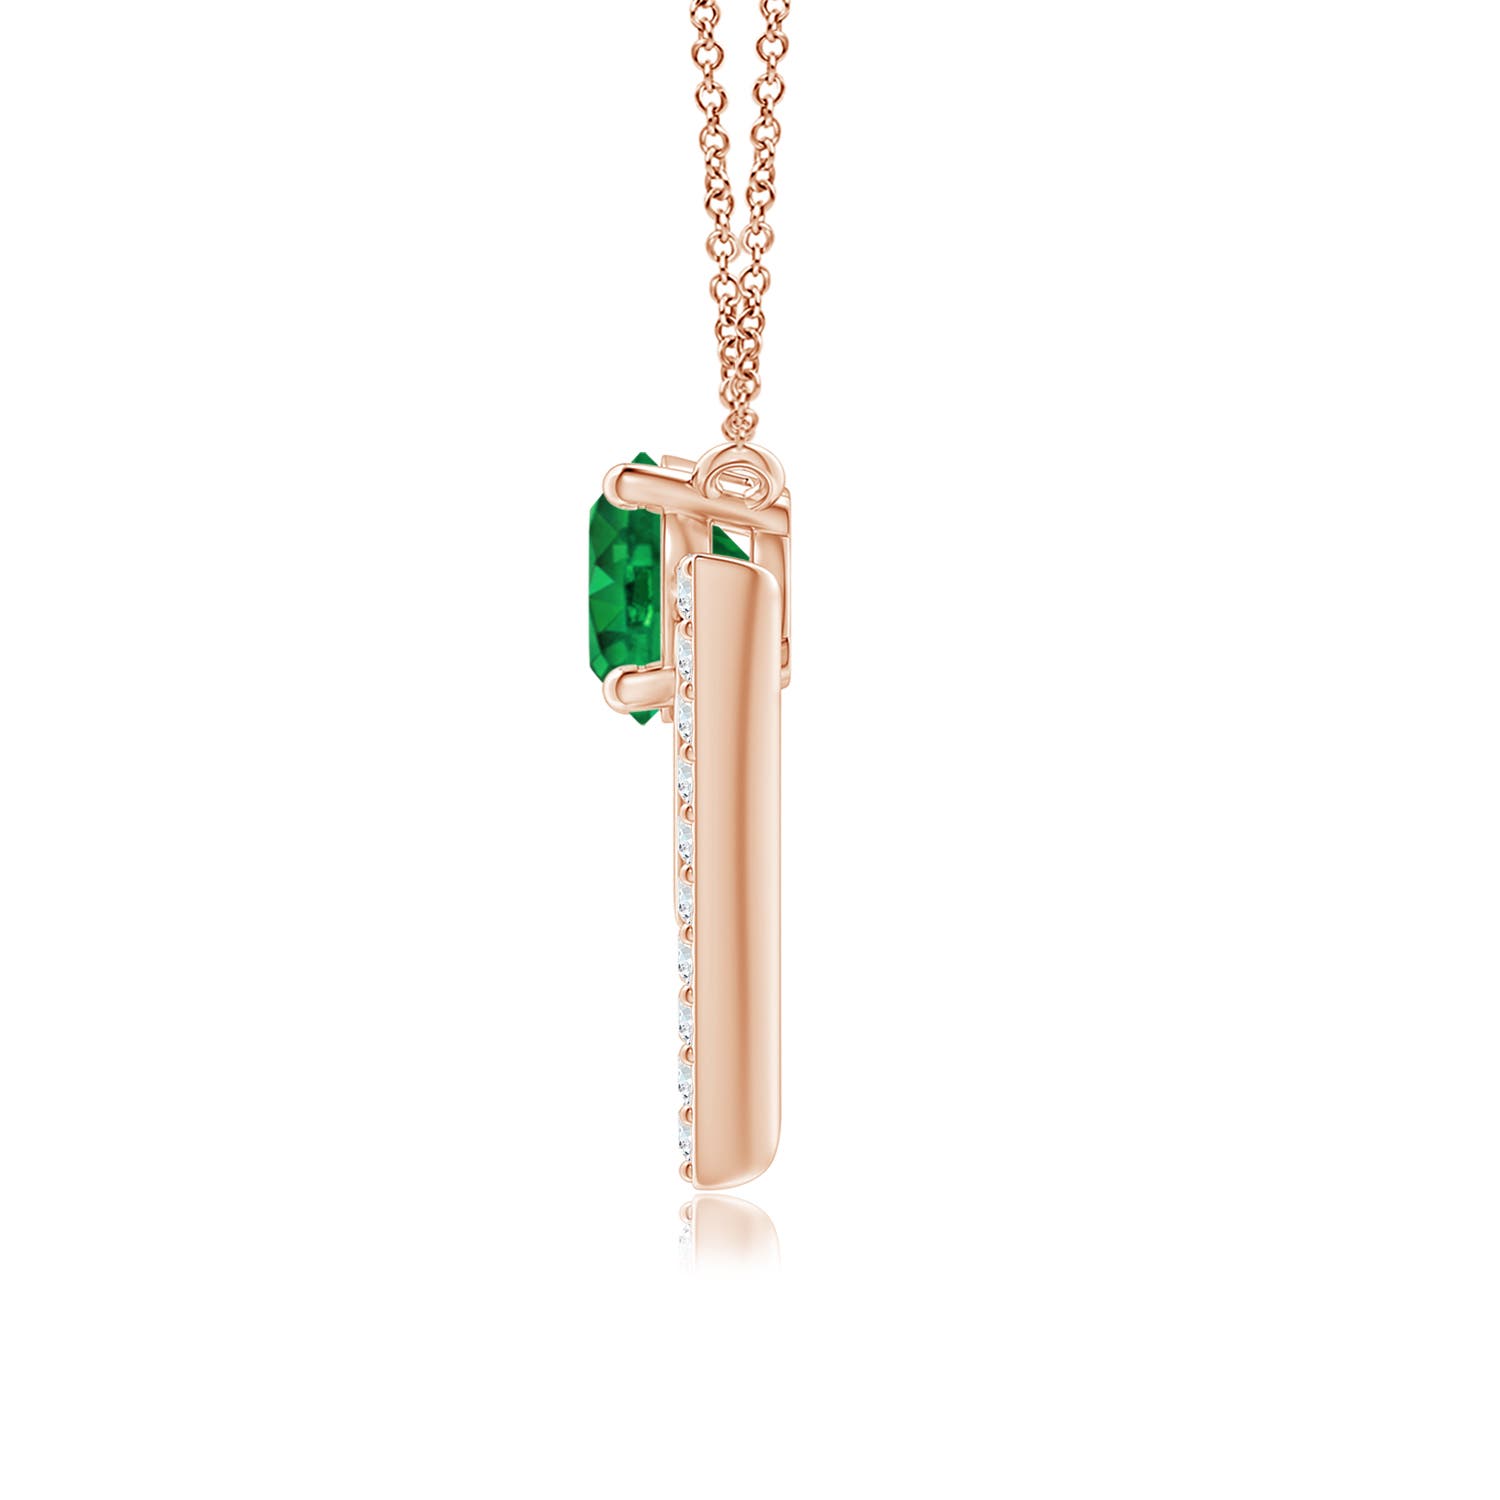 AAA - Emerald / 0.63 CT / 14 KT Rose Gold